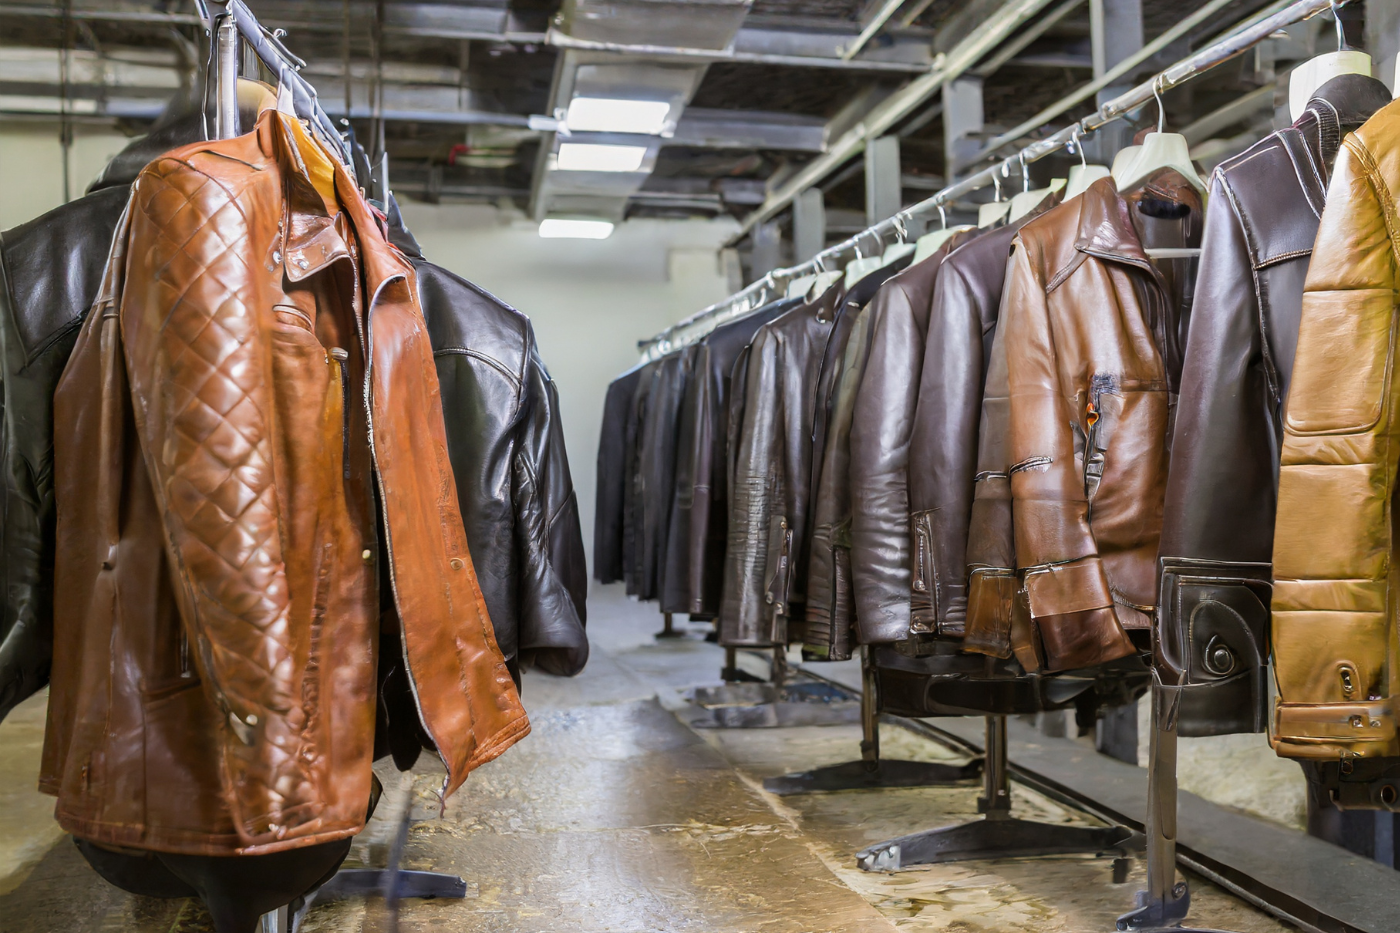 Heavy Leather Jackets Hanging